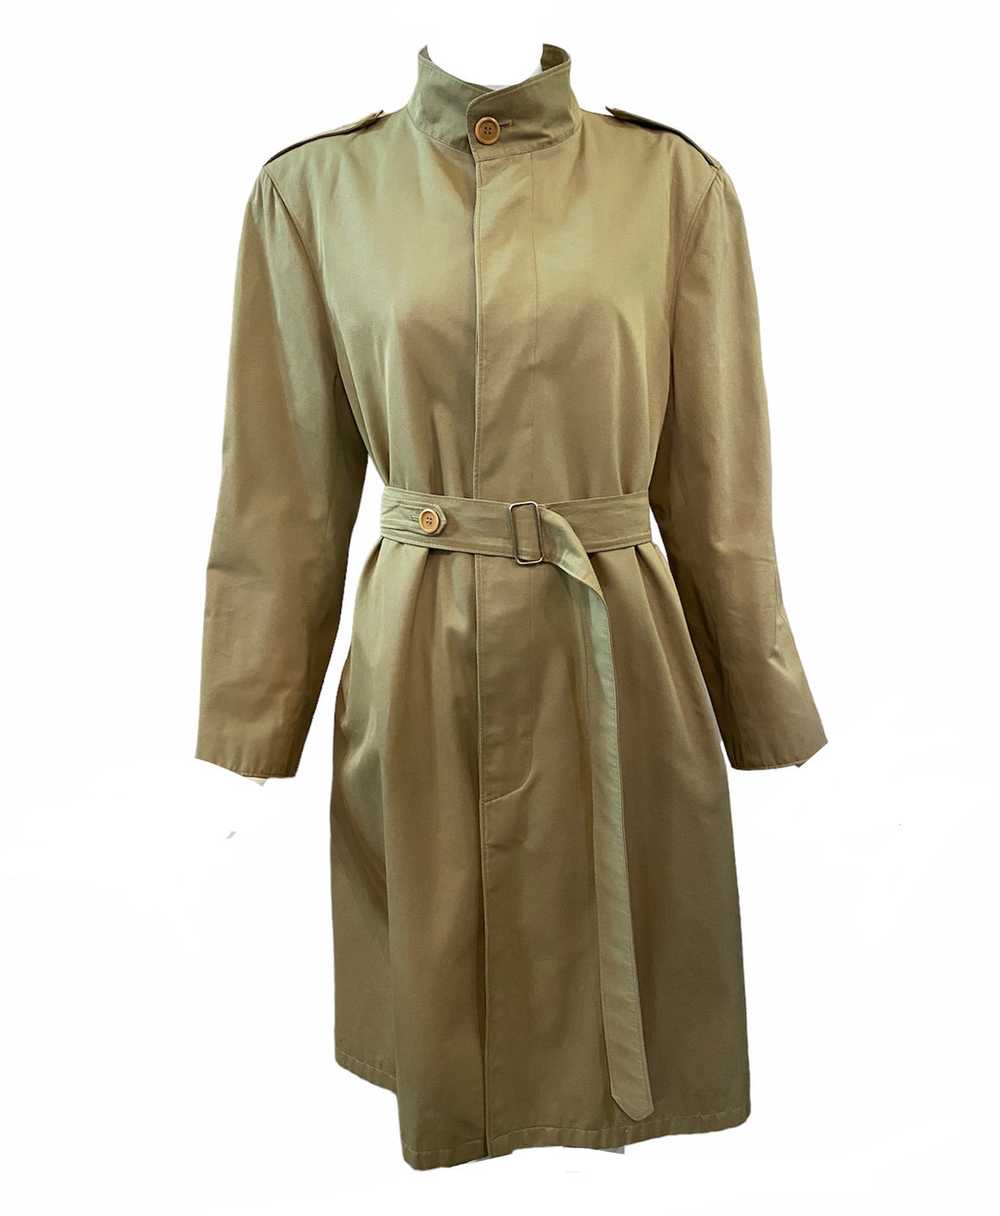 Gucci 80s Belted Trench Coat With Logo Buttons - image 2